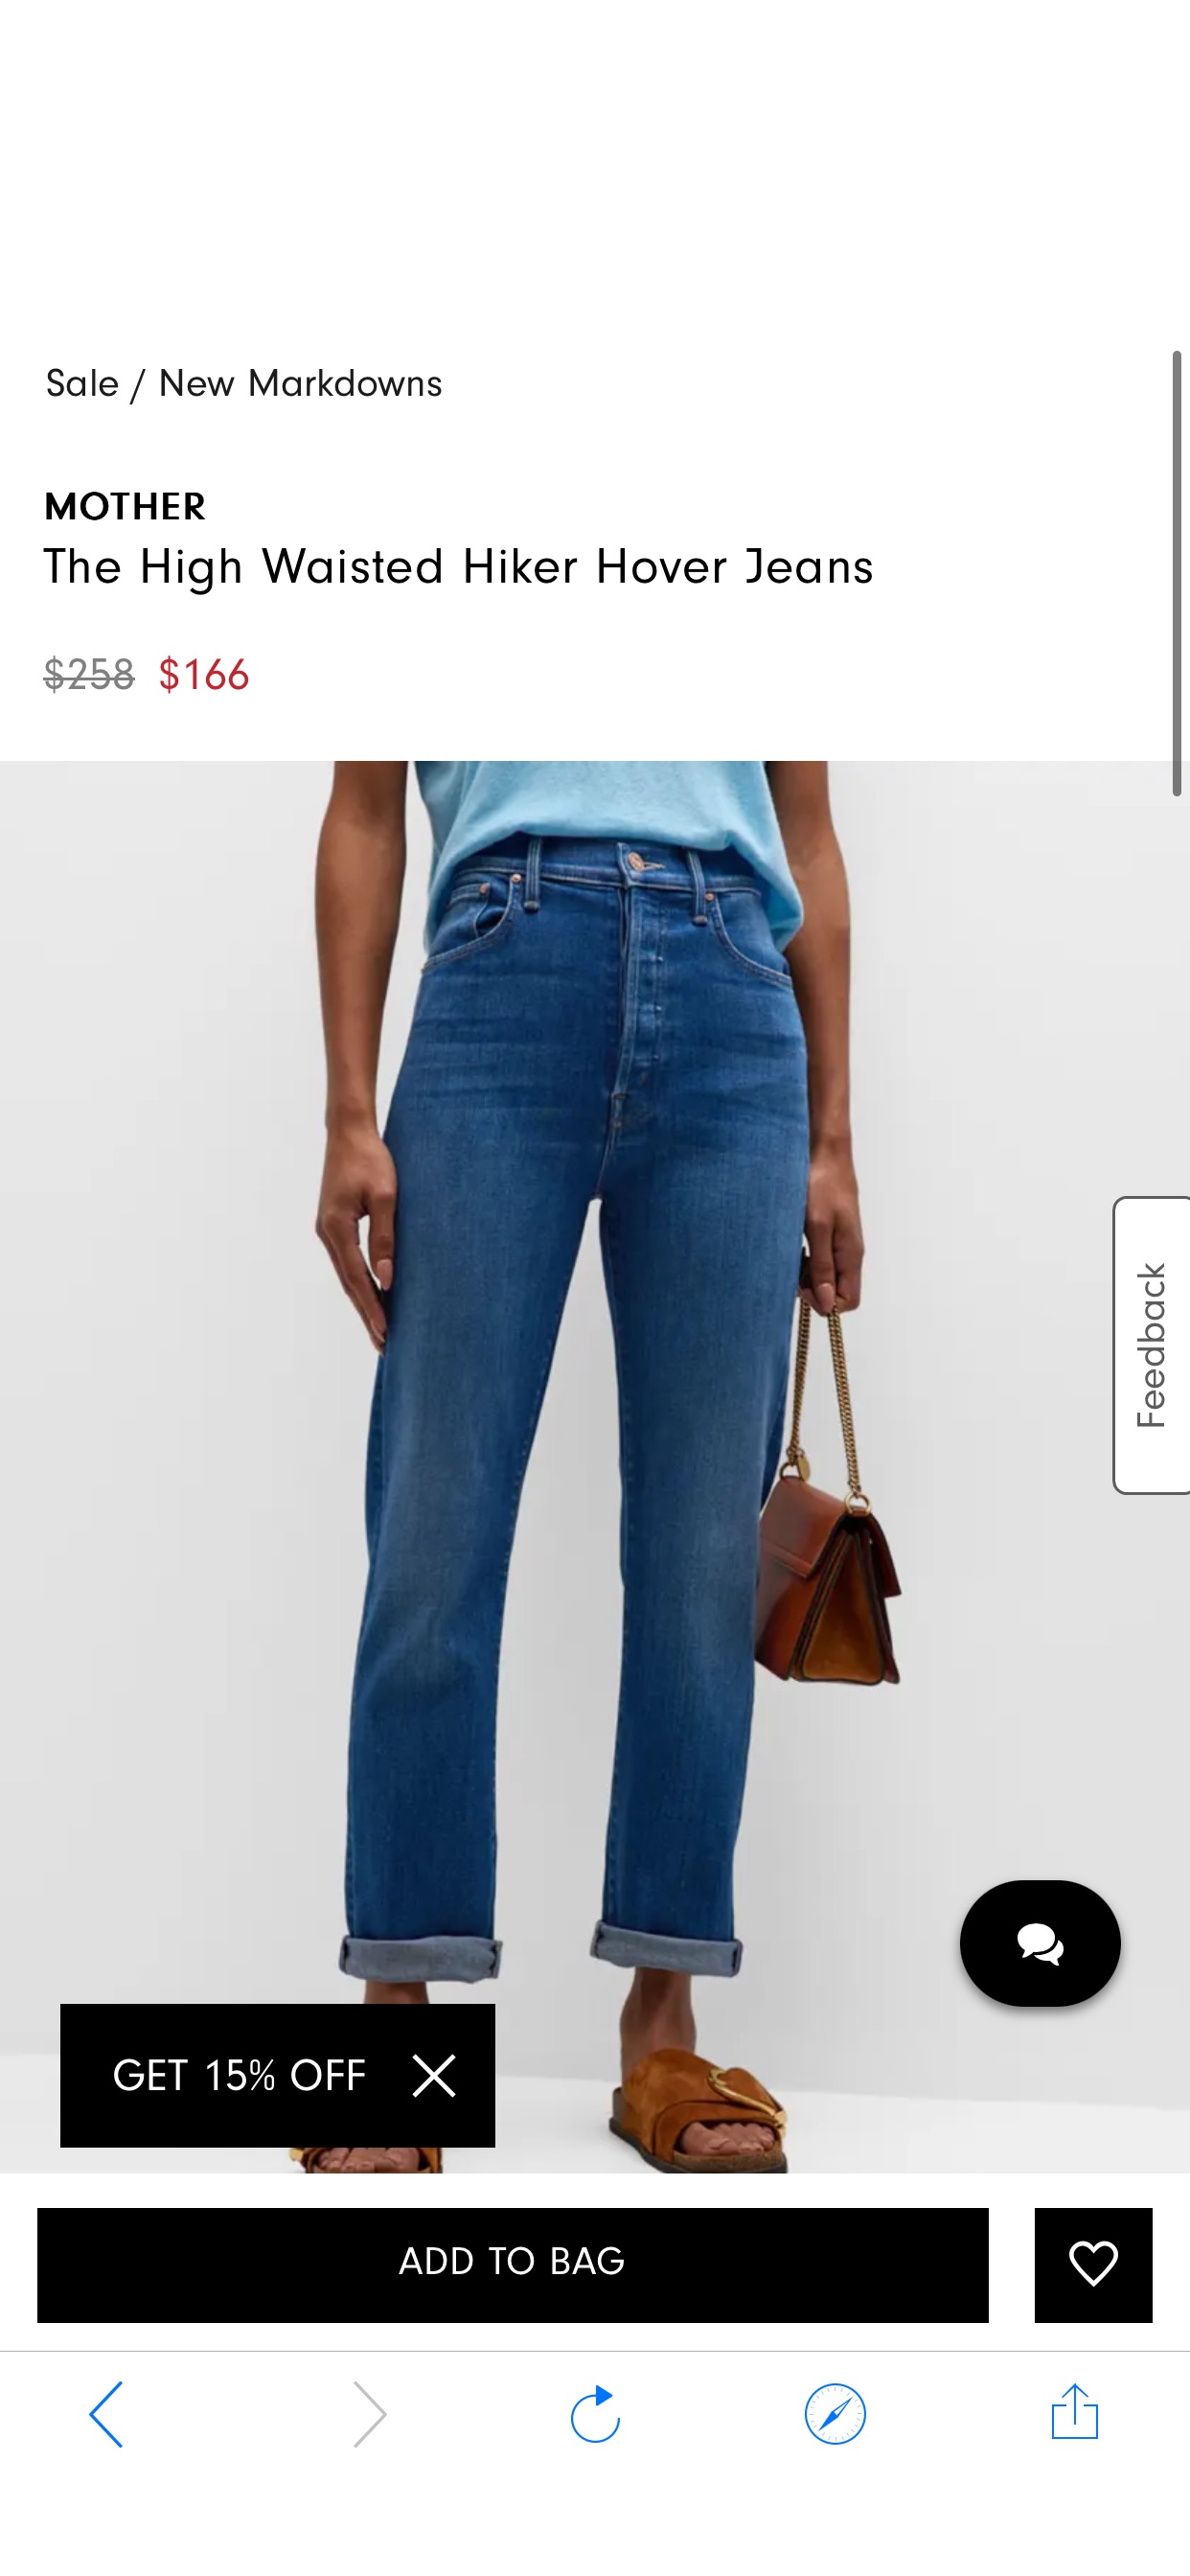 MOTHER The High Waisted Hiker Hover Jeans | Neiman Marcus